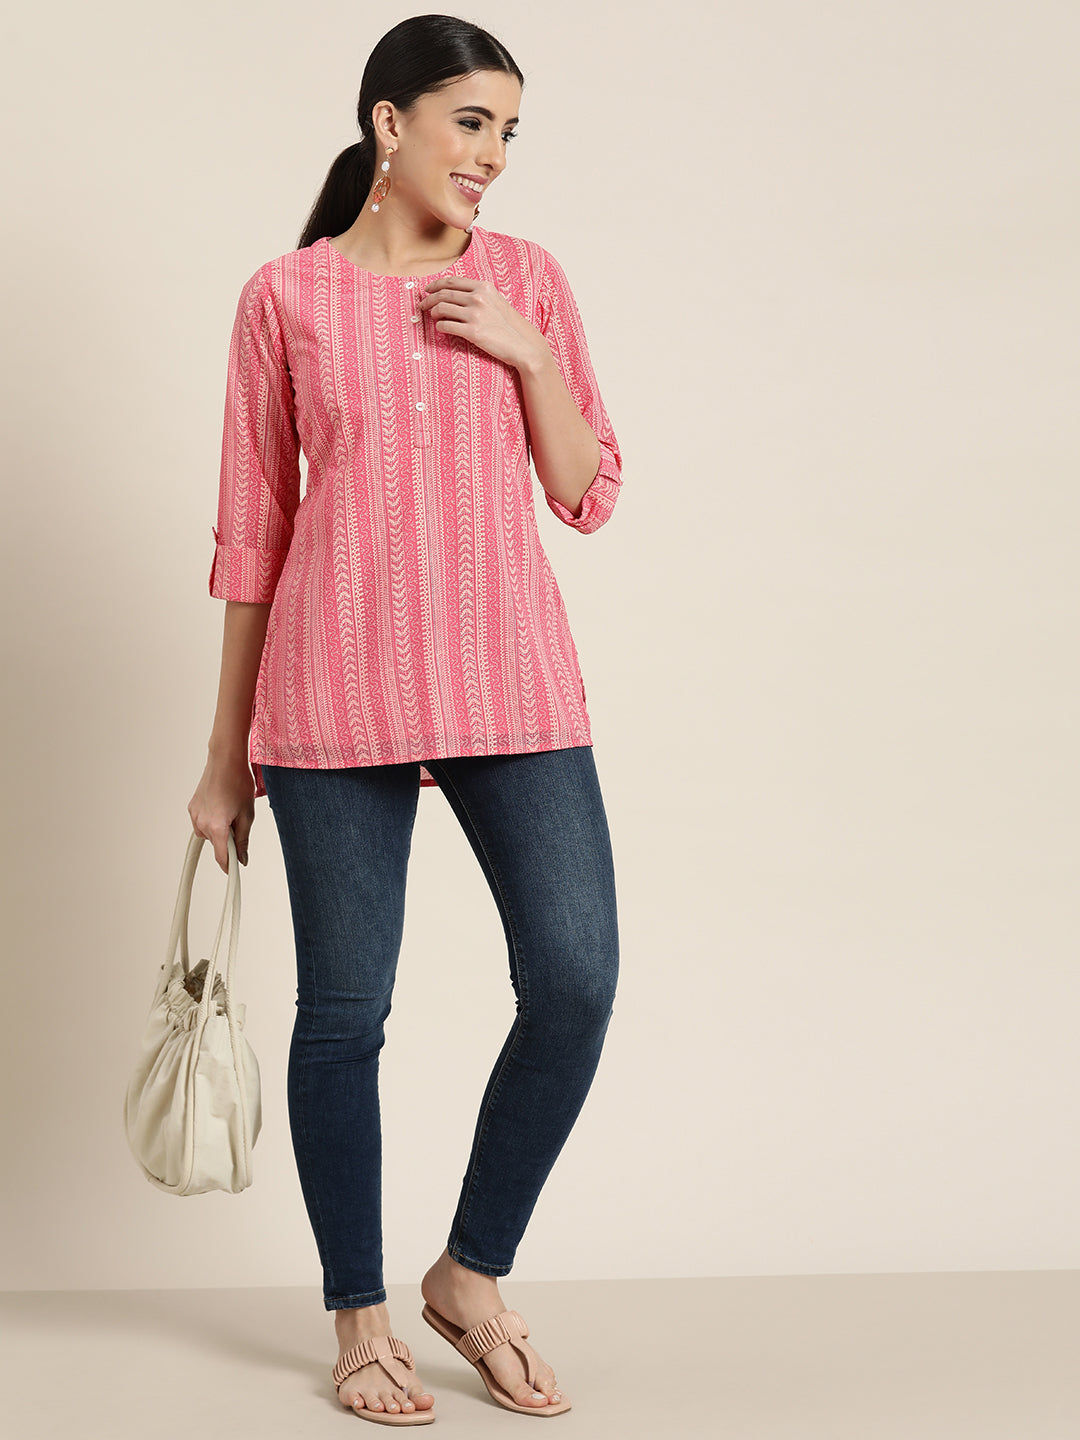 Women's  Pink Georgette Printed High-Low Tunic - Final Clearance Sale